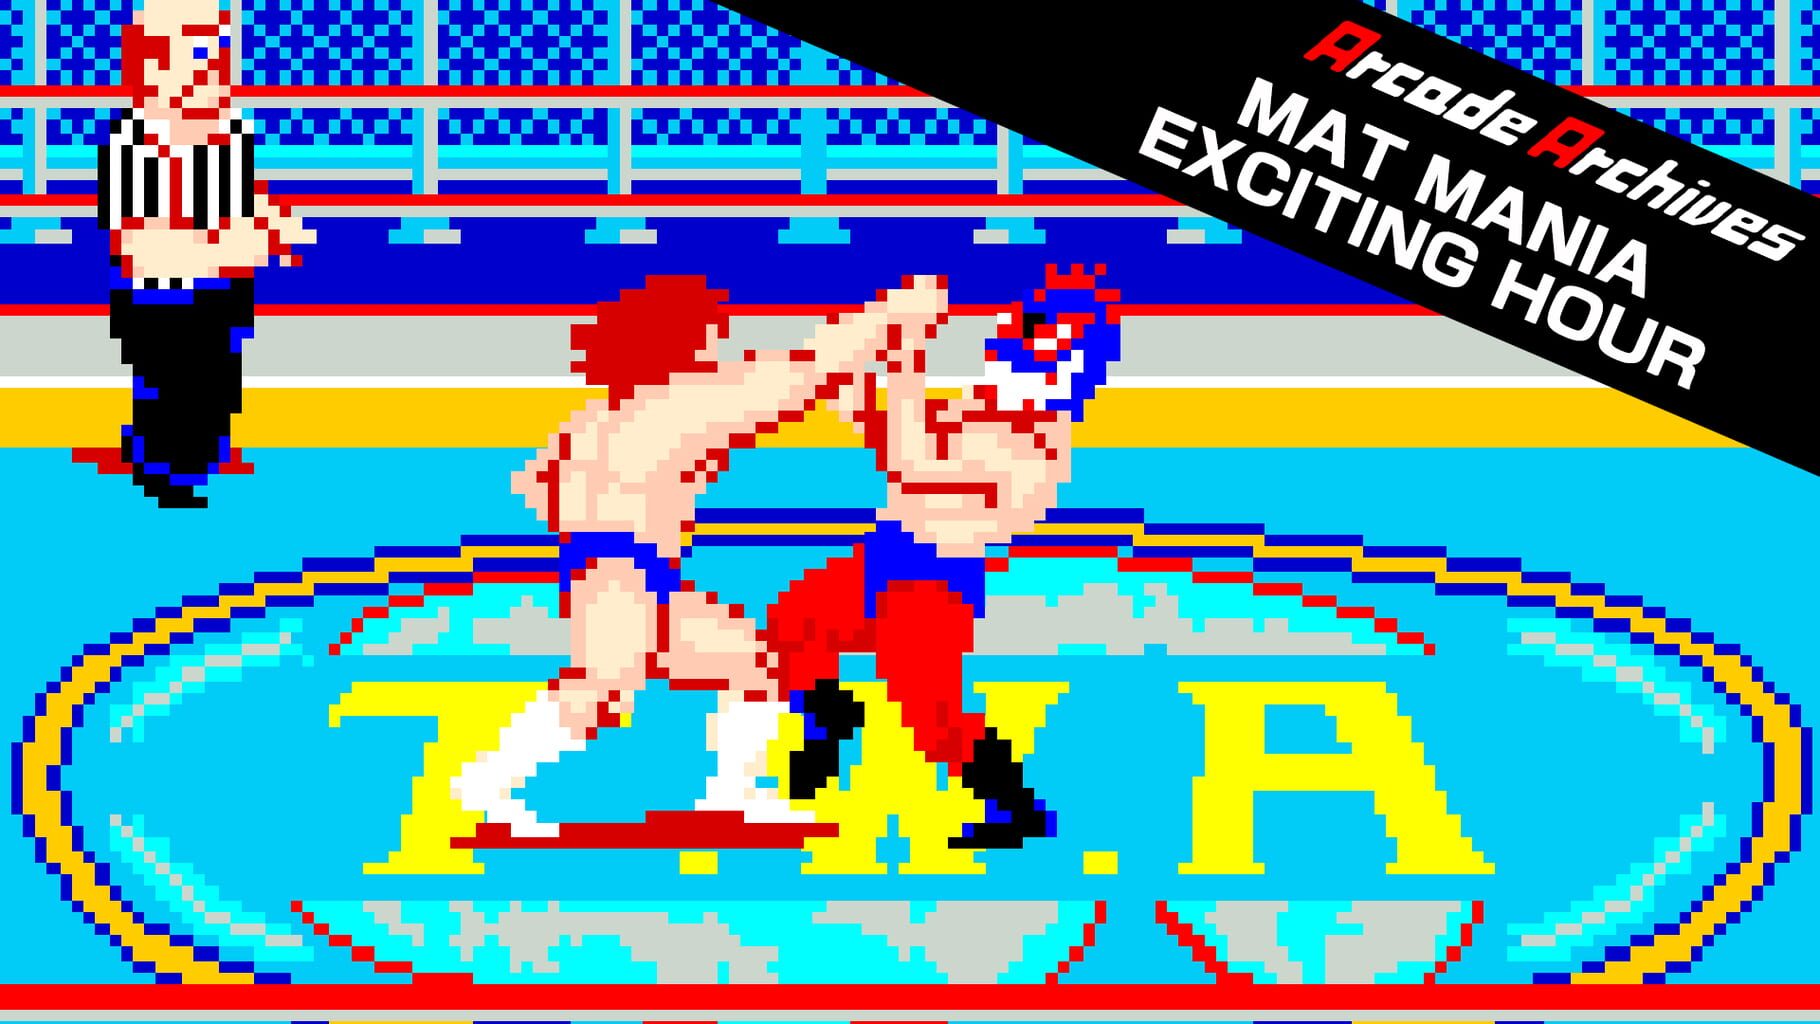 Arcade Archives: Mat Mania Exciting Hour artwork